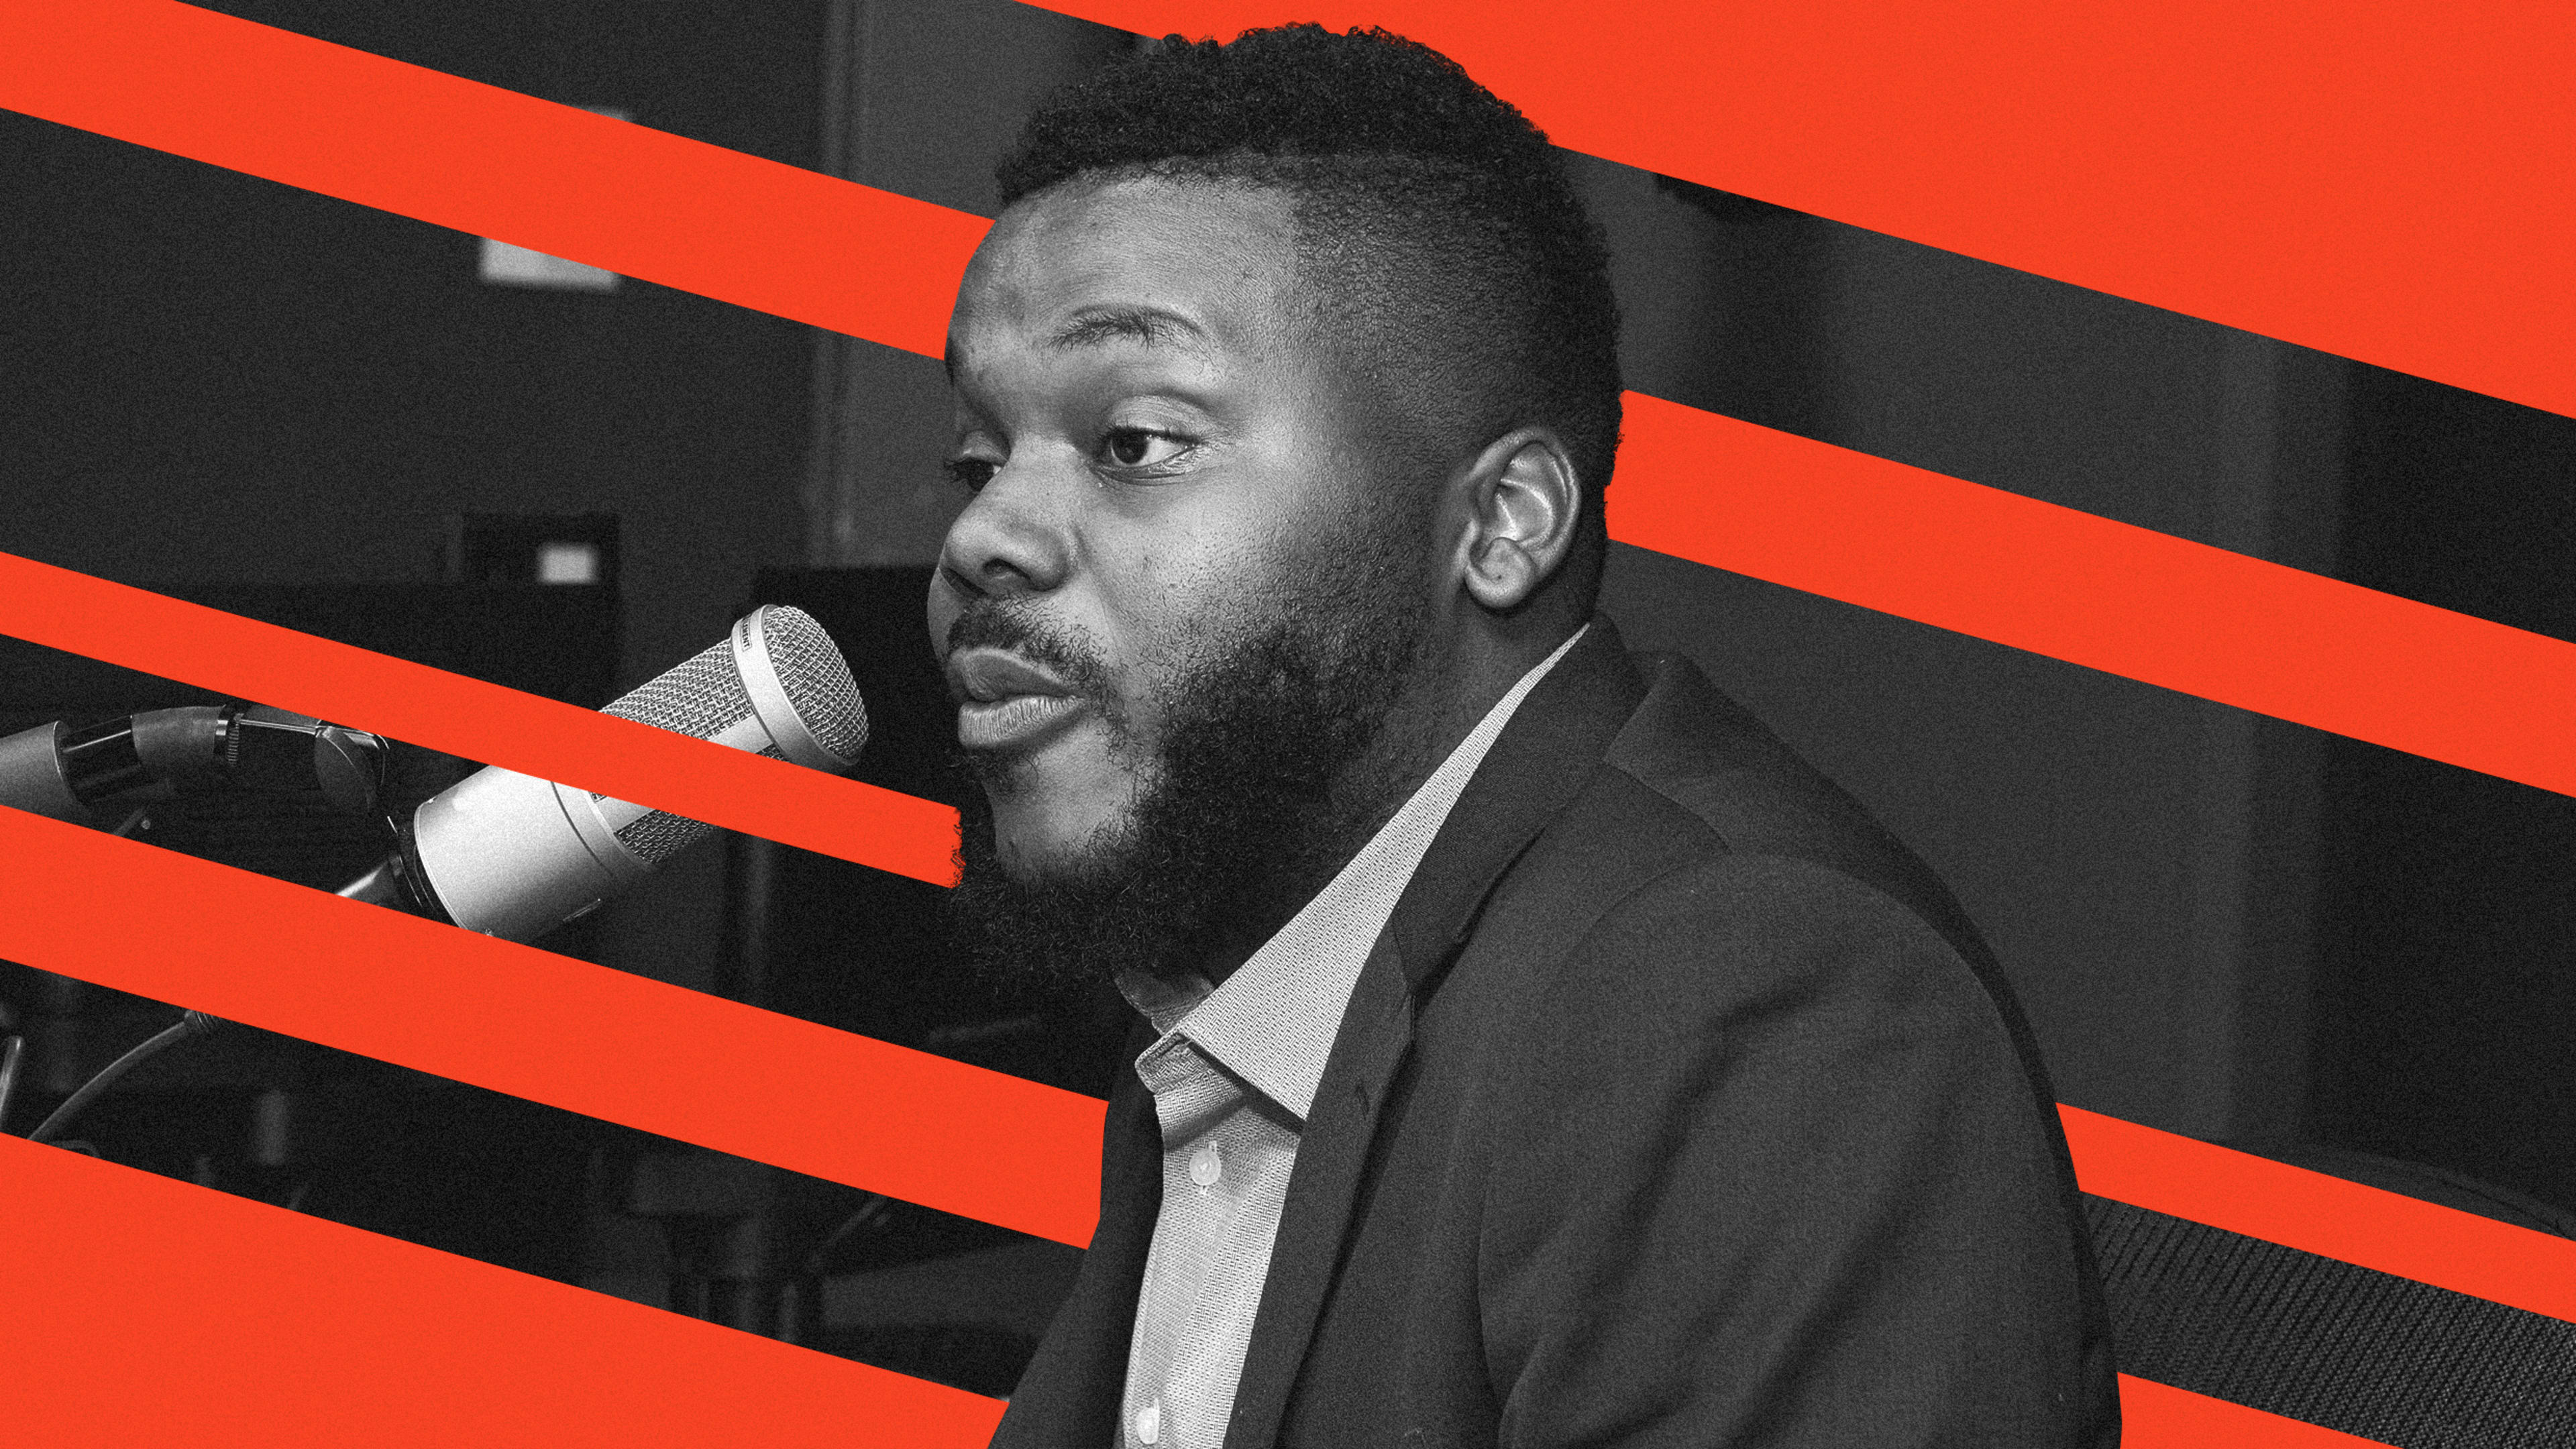 ‘Economic anxiety is suffocating for people’: Why this young mayor championed a radical cash giveaway